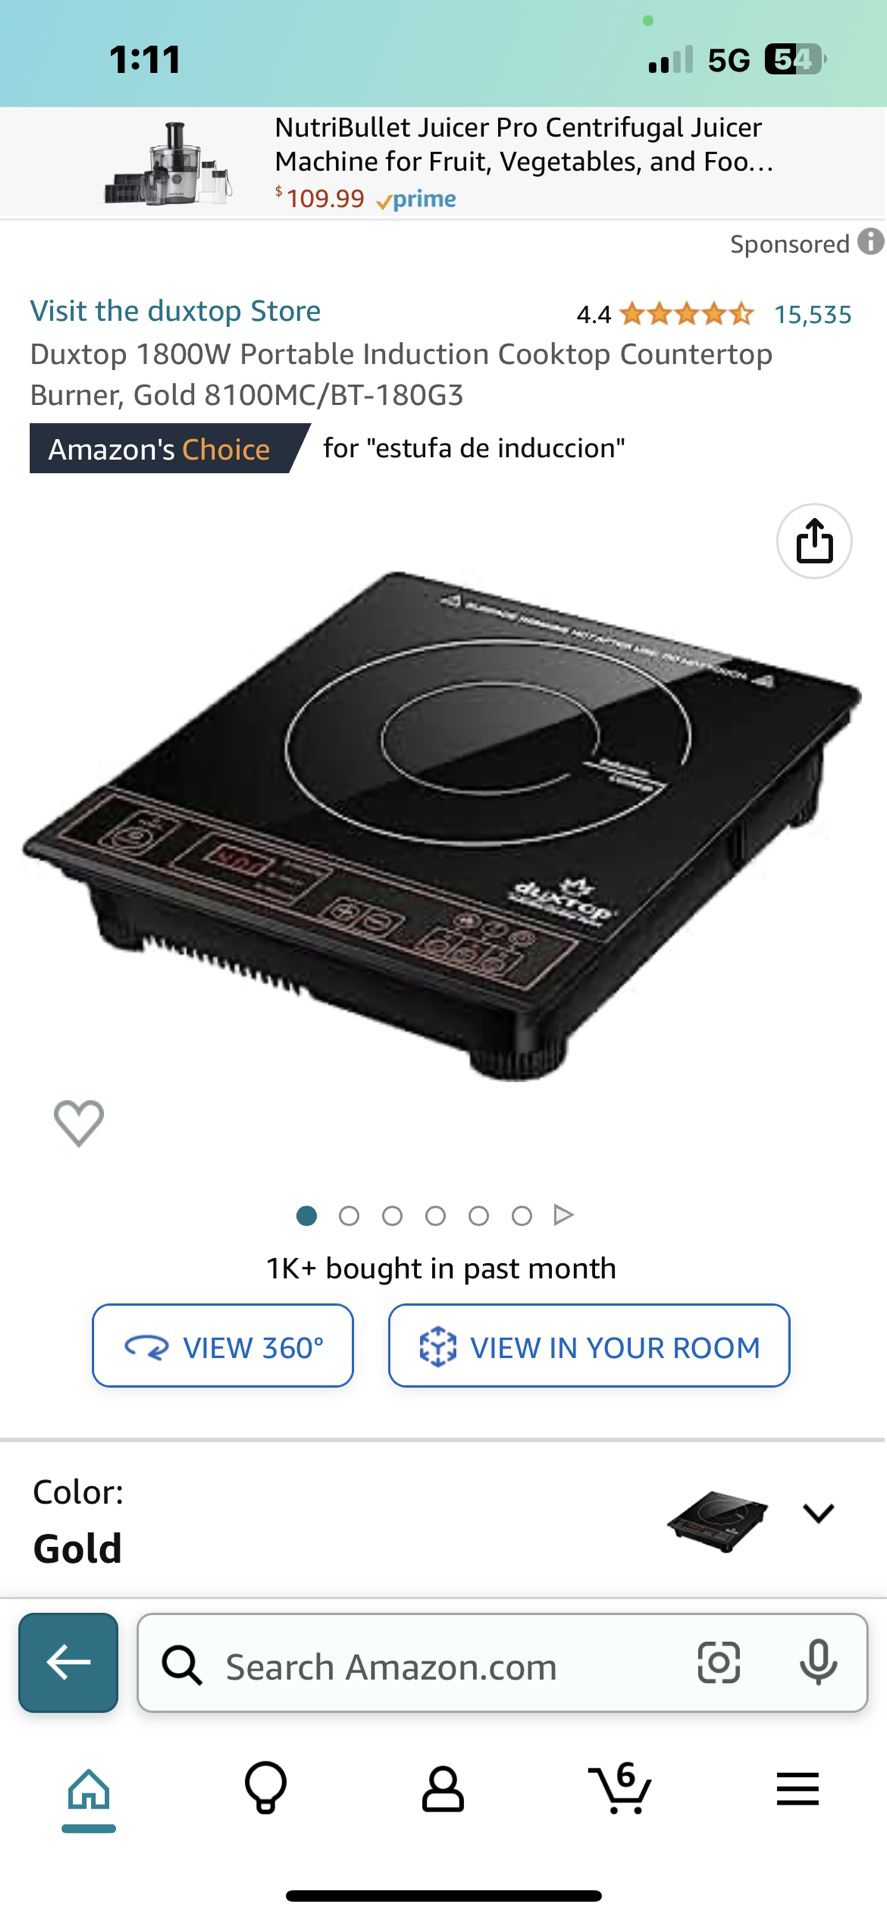 Duxtop 1800W Portable Induction Cooktop Countertop Burner, Gold 8100MC/BT-180G3  for Sale in Brockton, MA OfferUp